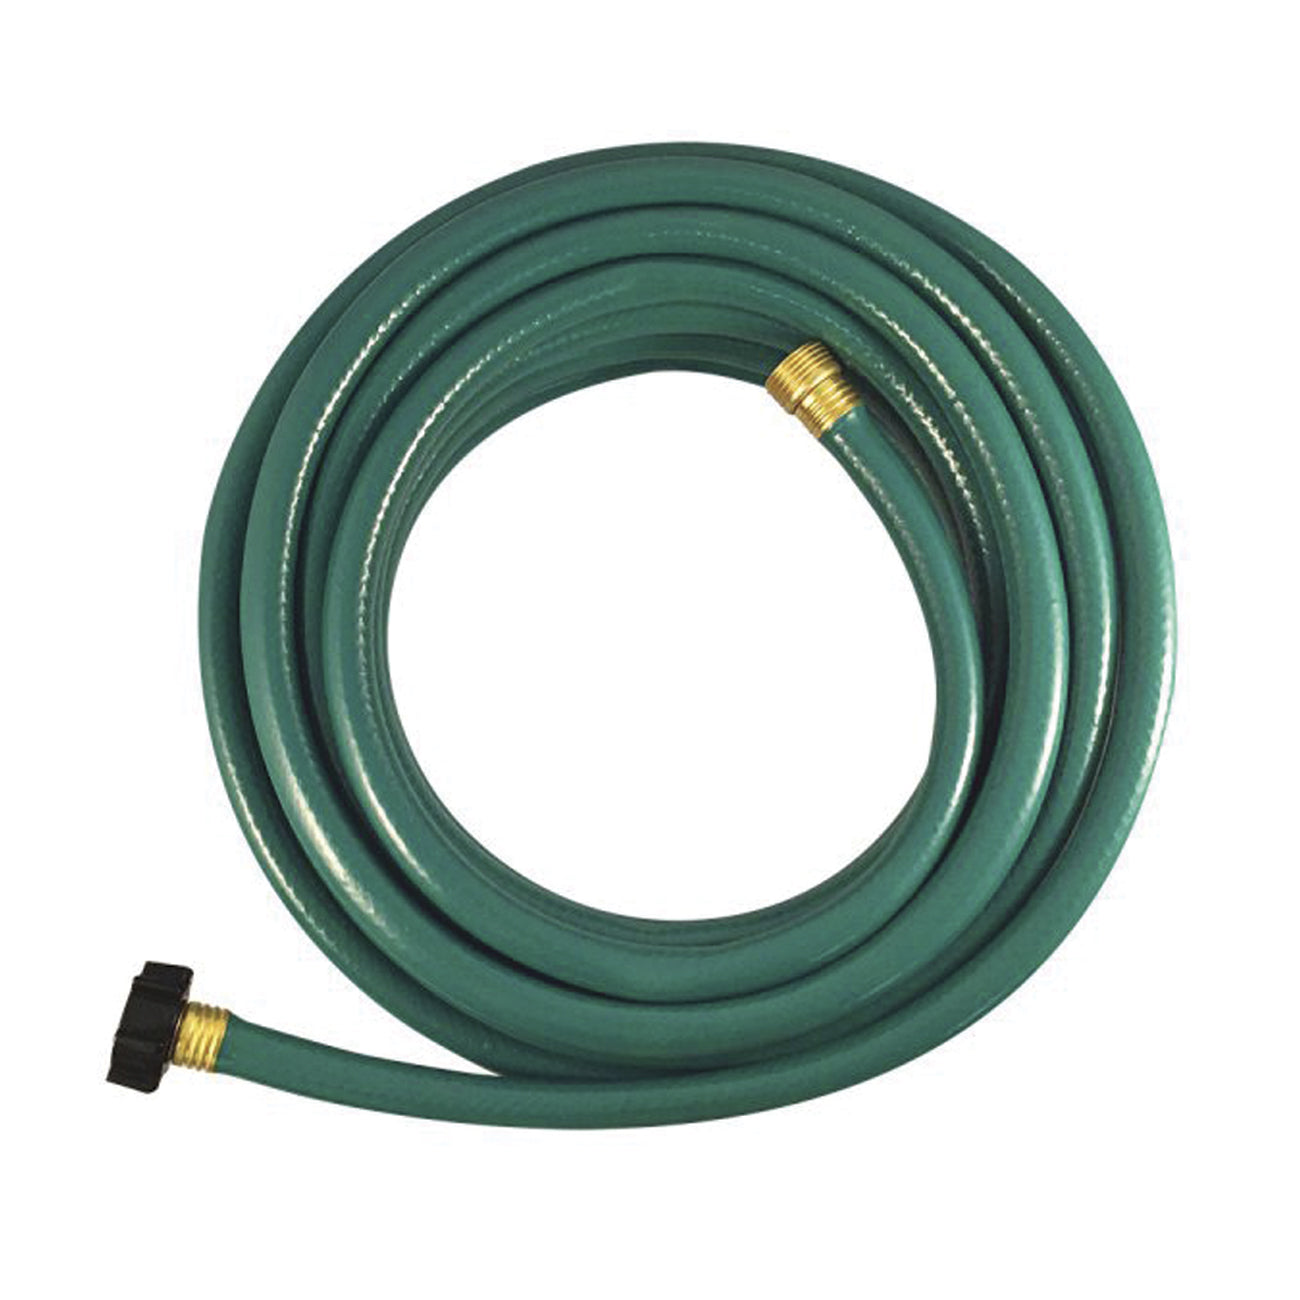 Water Hose 3 Ply 1/2" x 100'